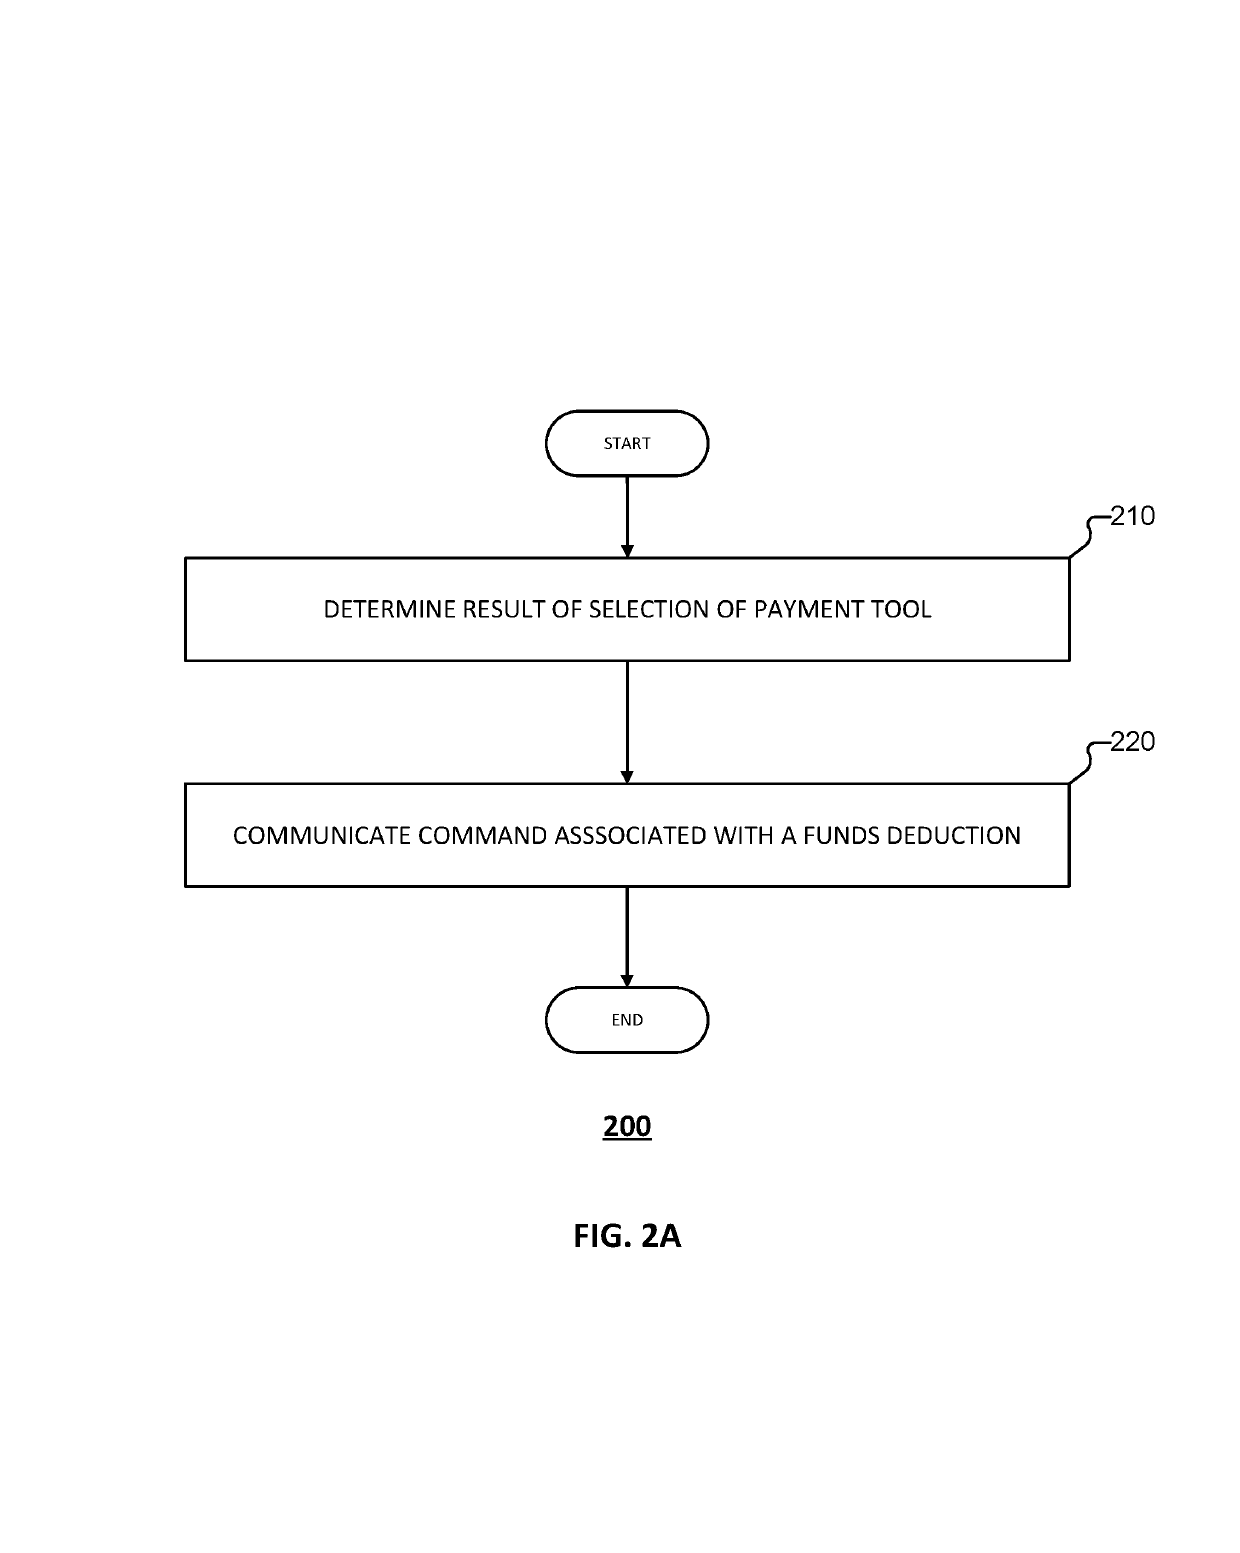 Processing electronic payments using at least two payment tools for a transaction